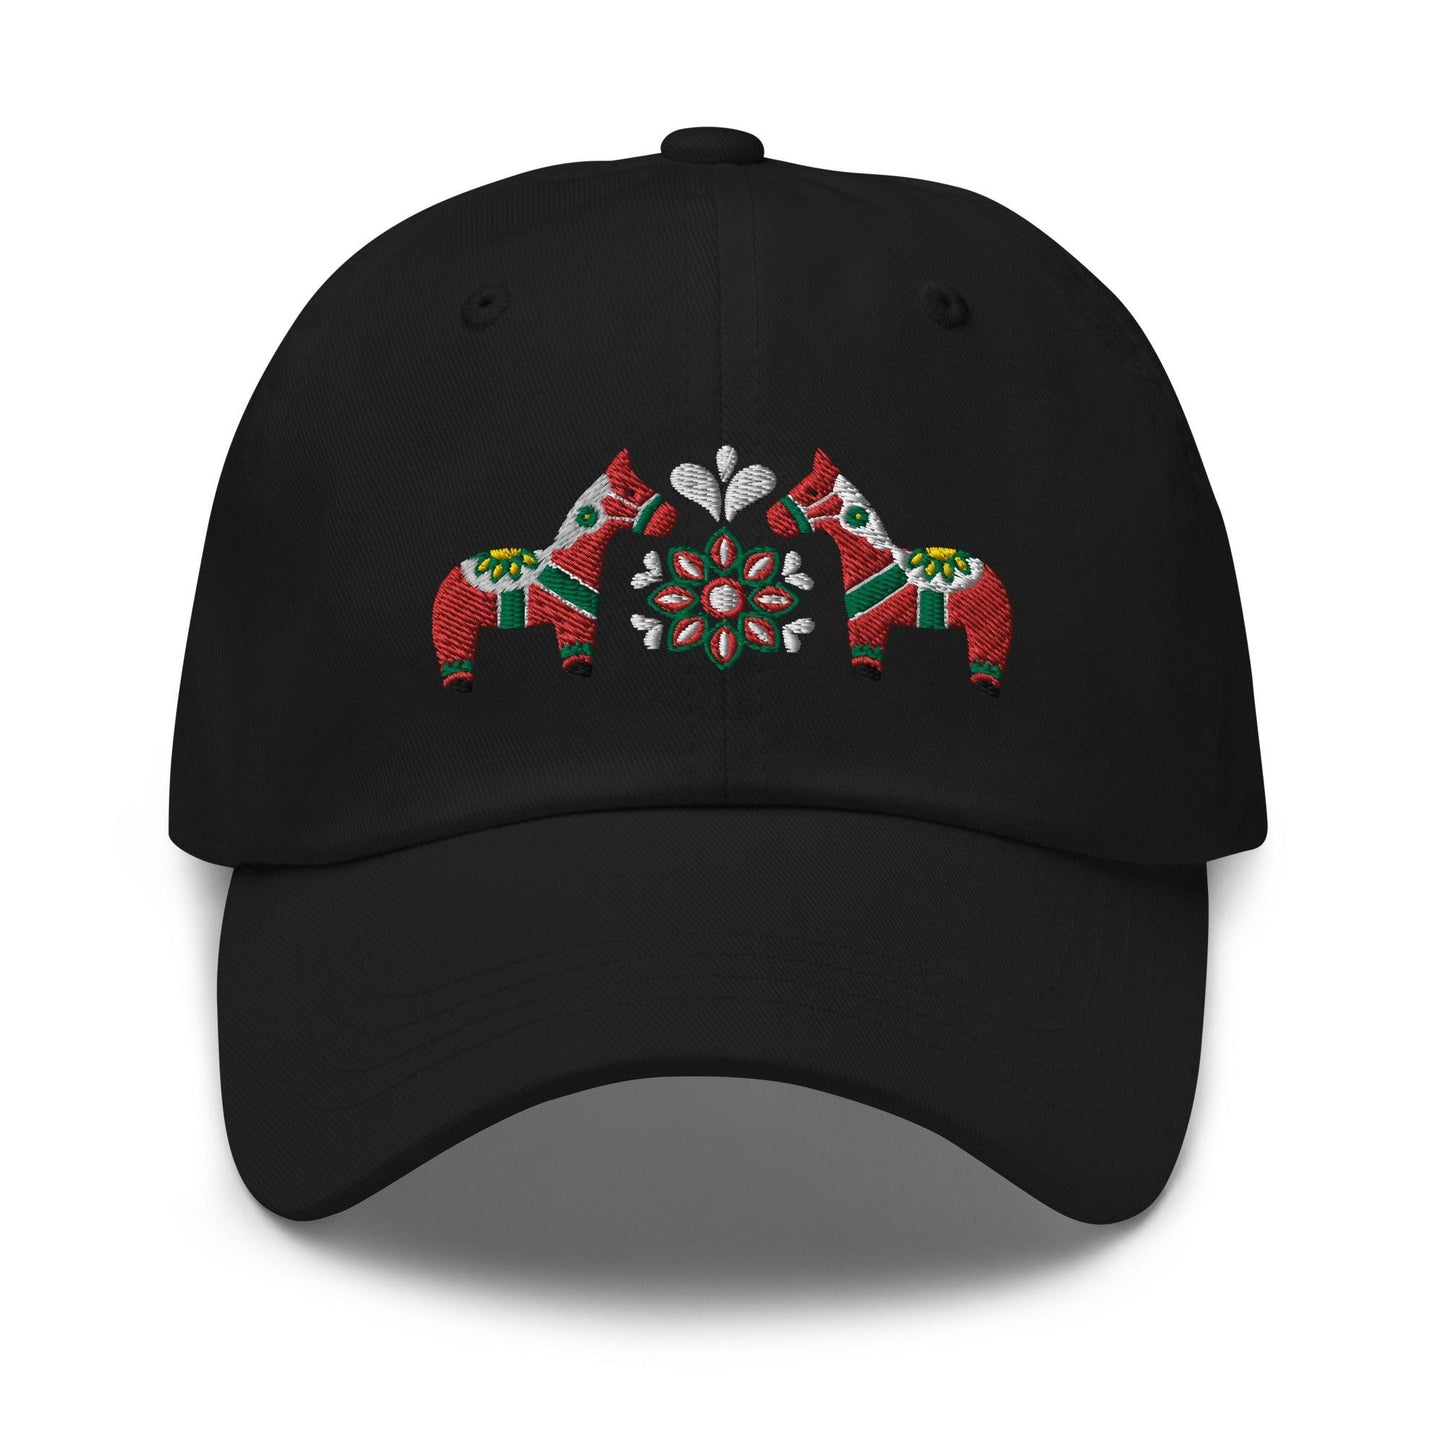 Swedish Dala Horse Embroidered Dad Hat - Red - The Global Wanderer